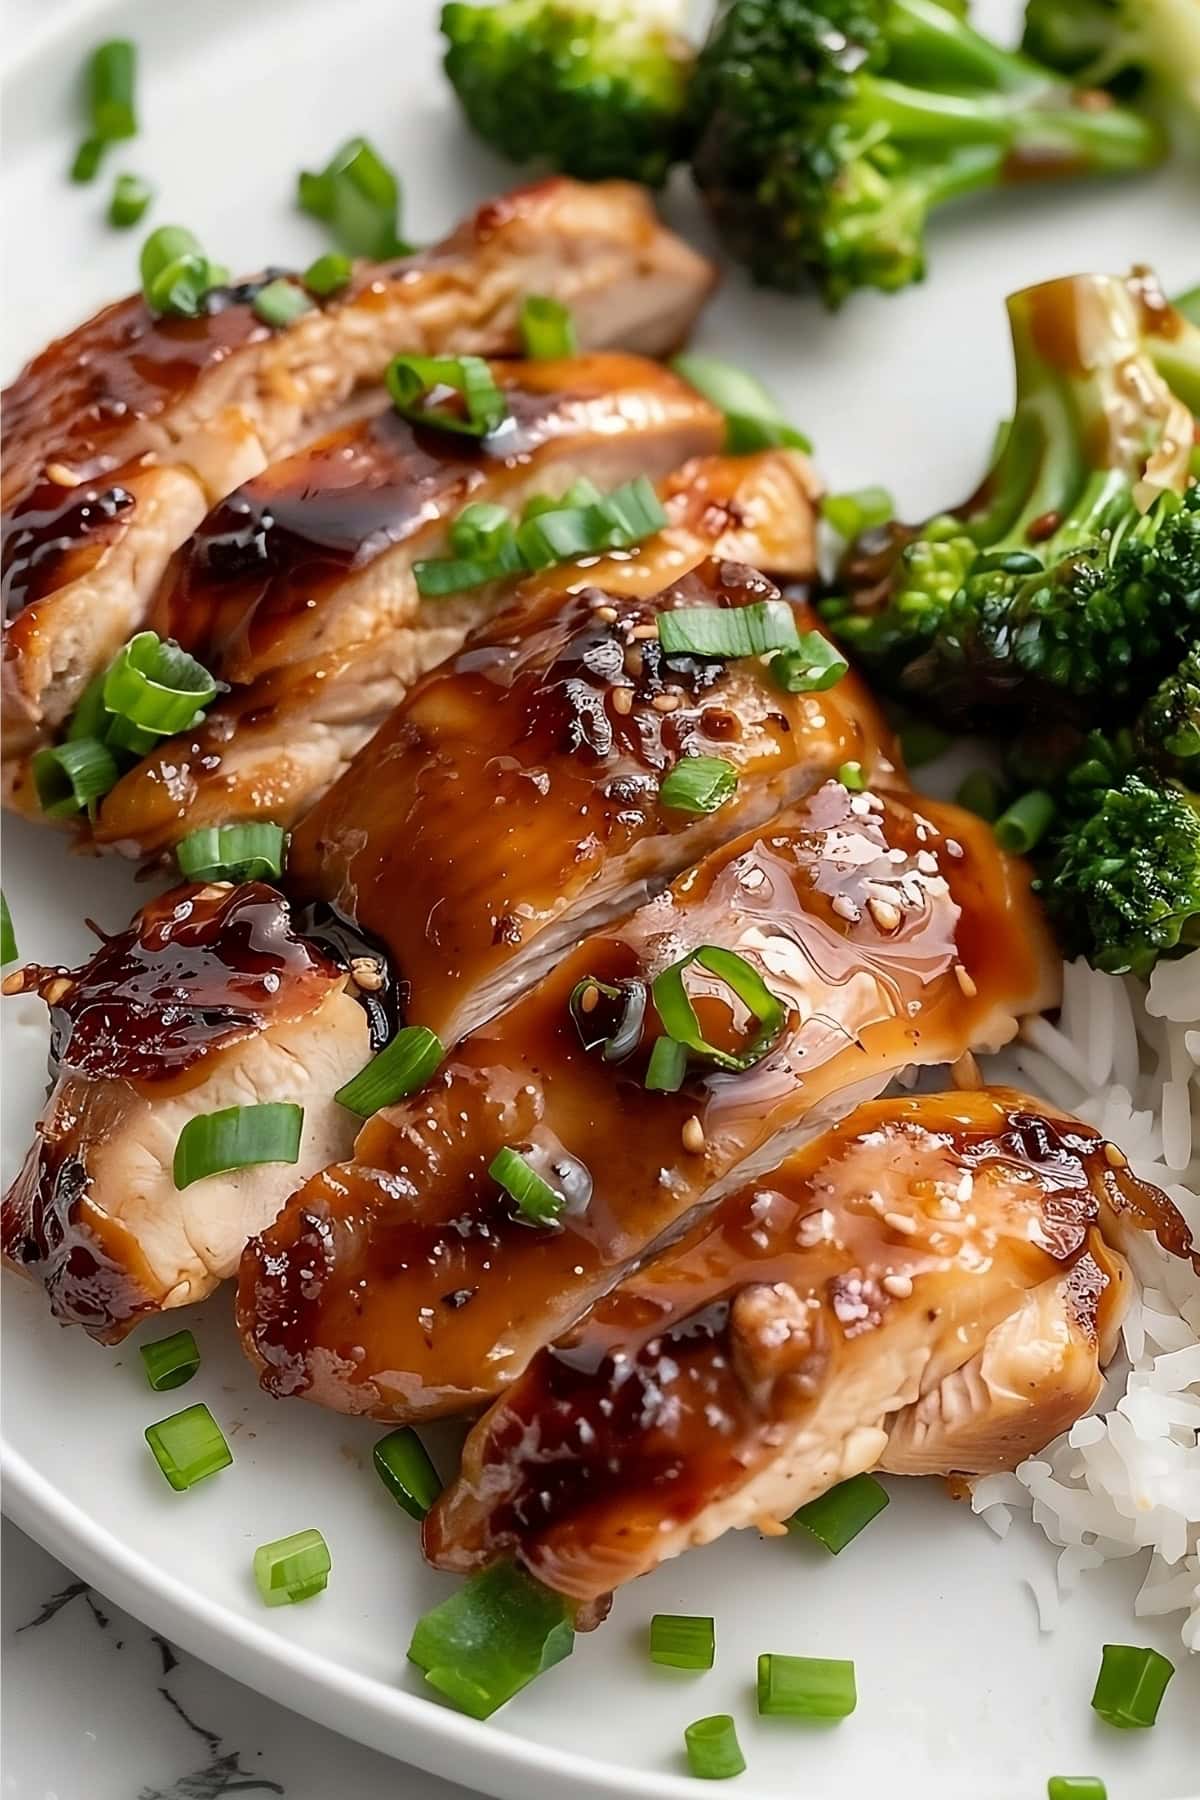 Sliced teriyaki chicken thigh served with rice and steamed broccoli.